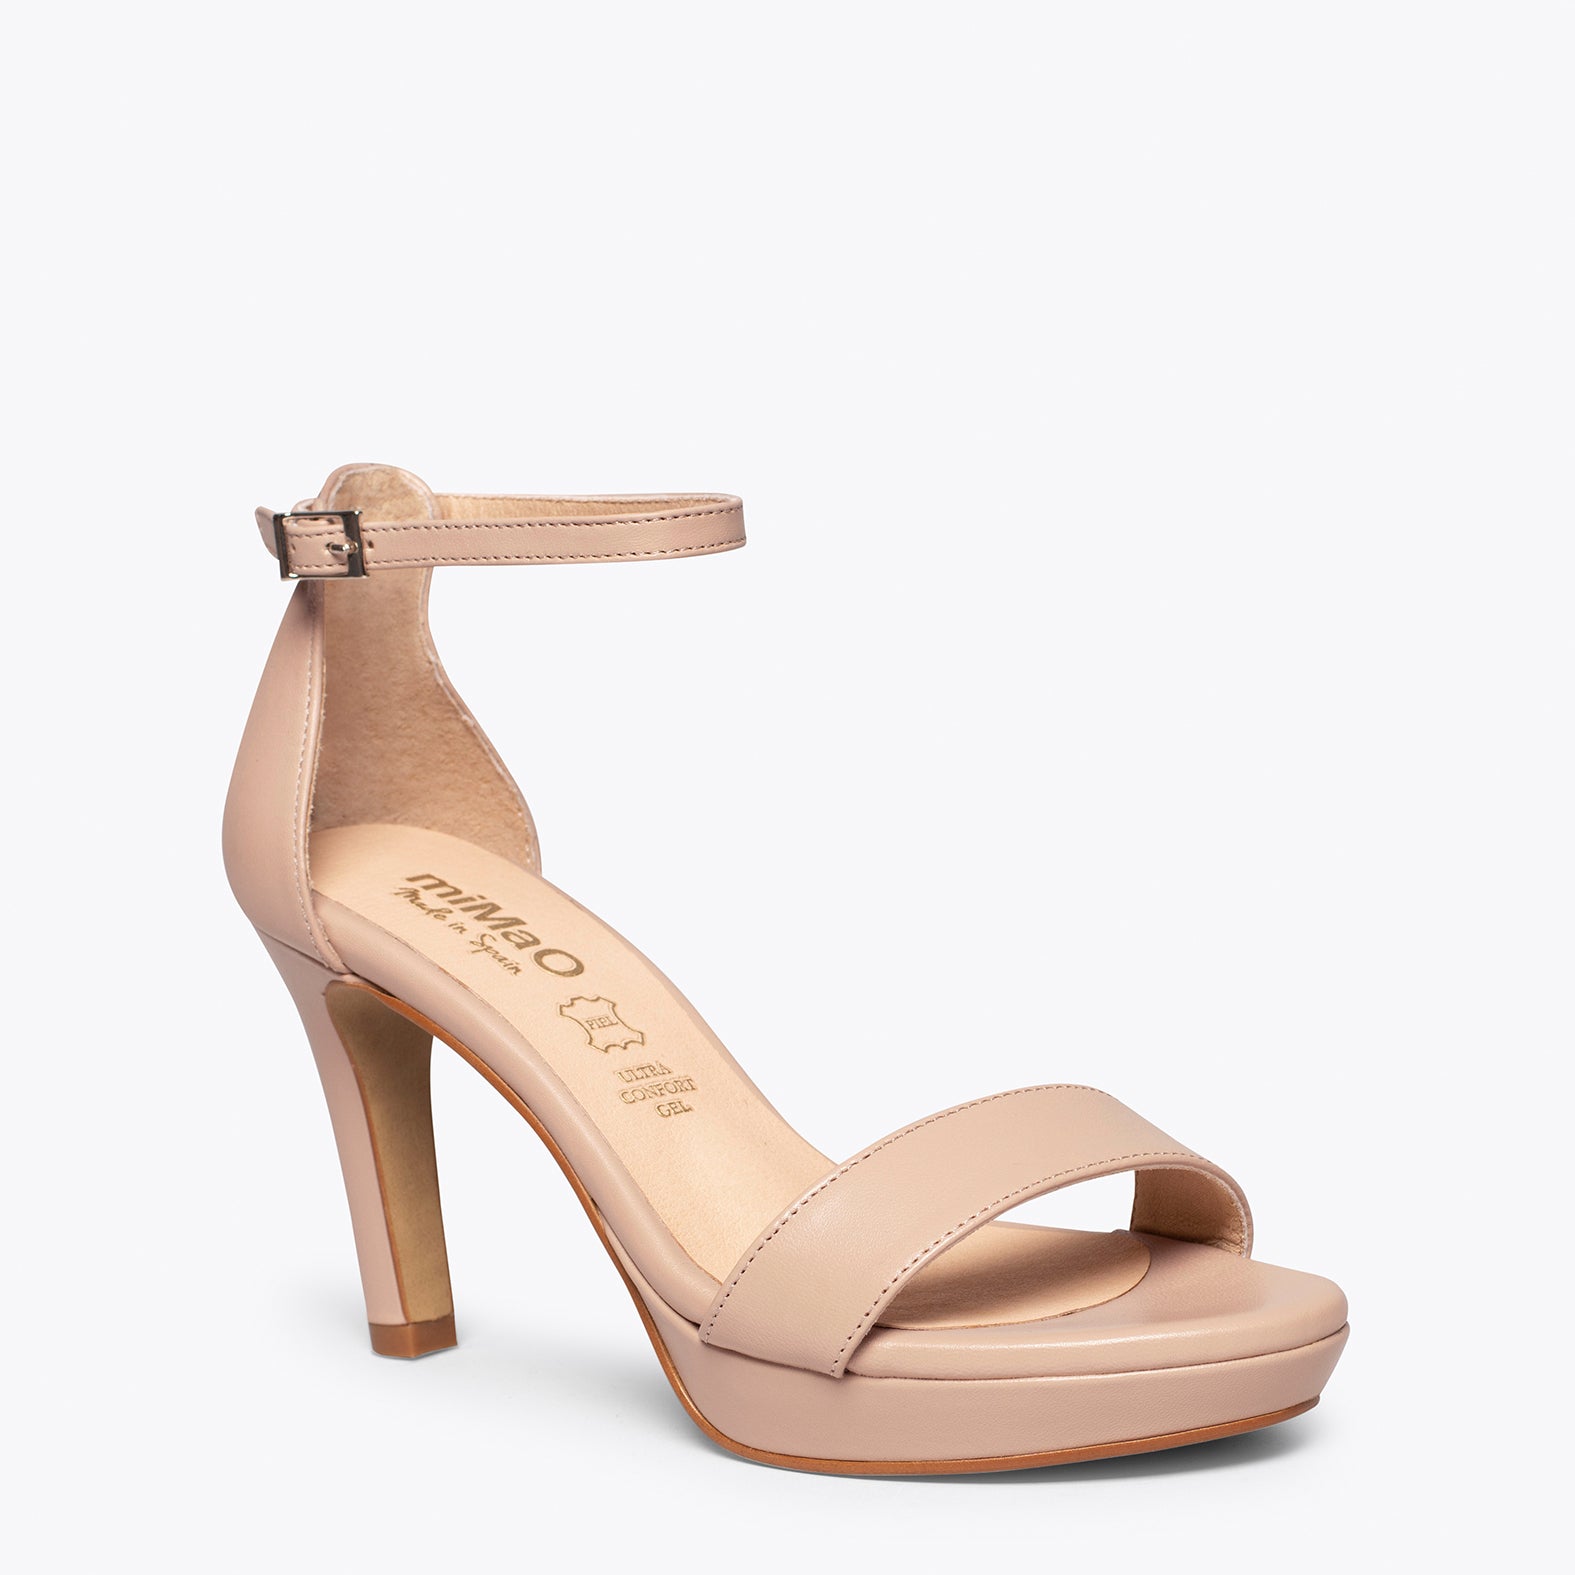 PARTY – TAUPE high heel sandals with platform